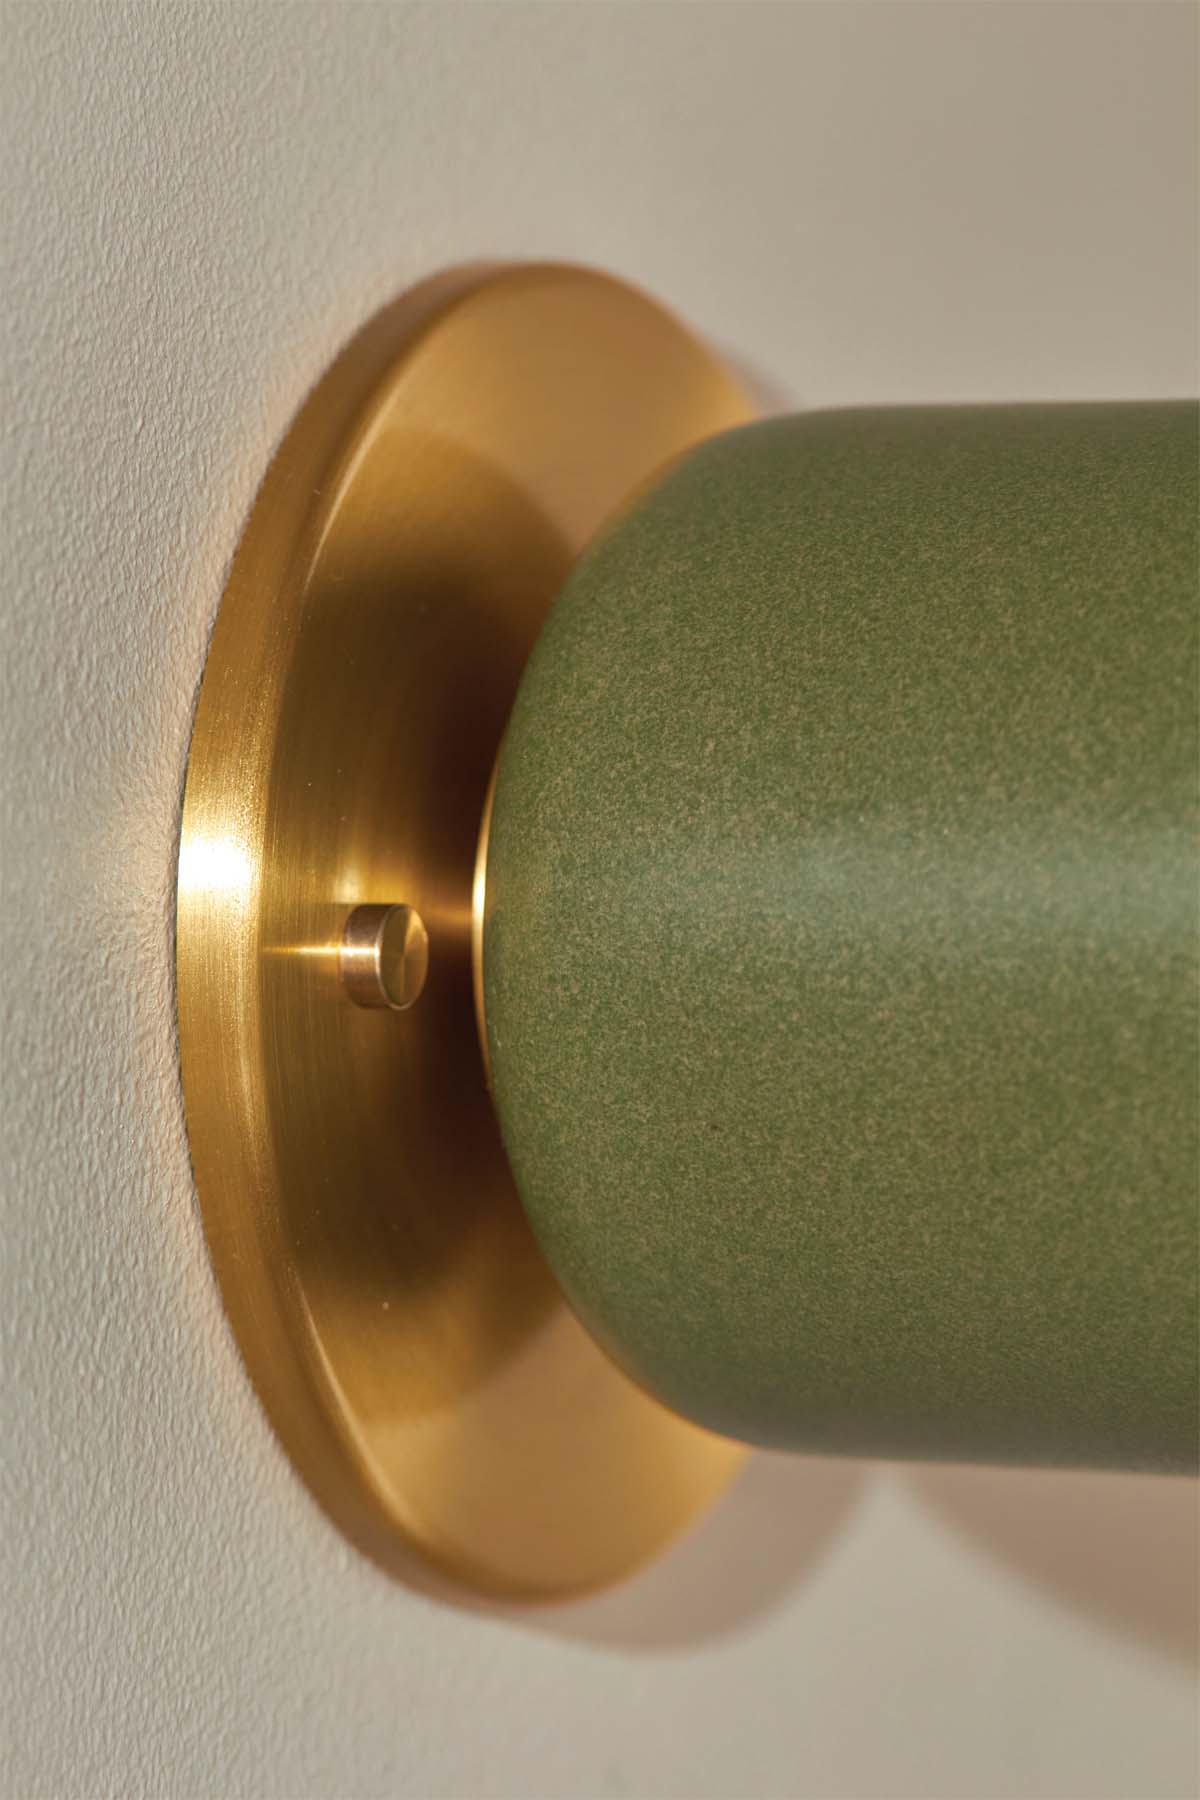 Terra 1 Surface Sconce, Slim Base Adapter in Olive and Brass. Image by Lawrence Furzey.